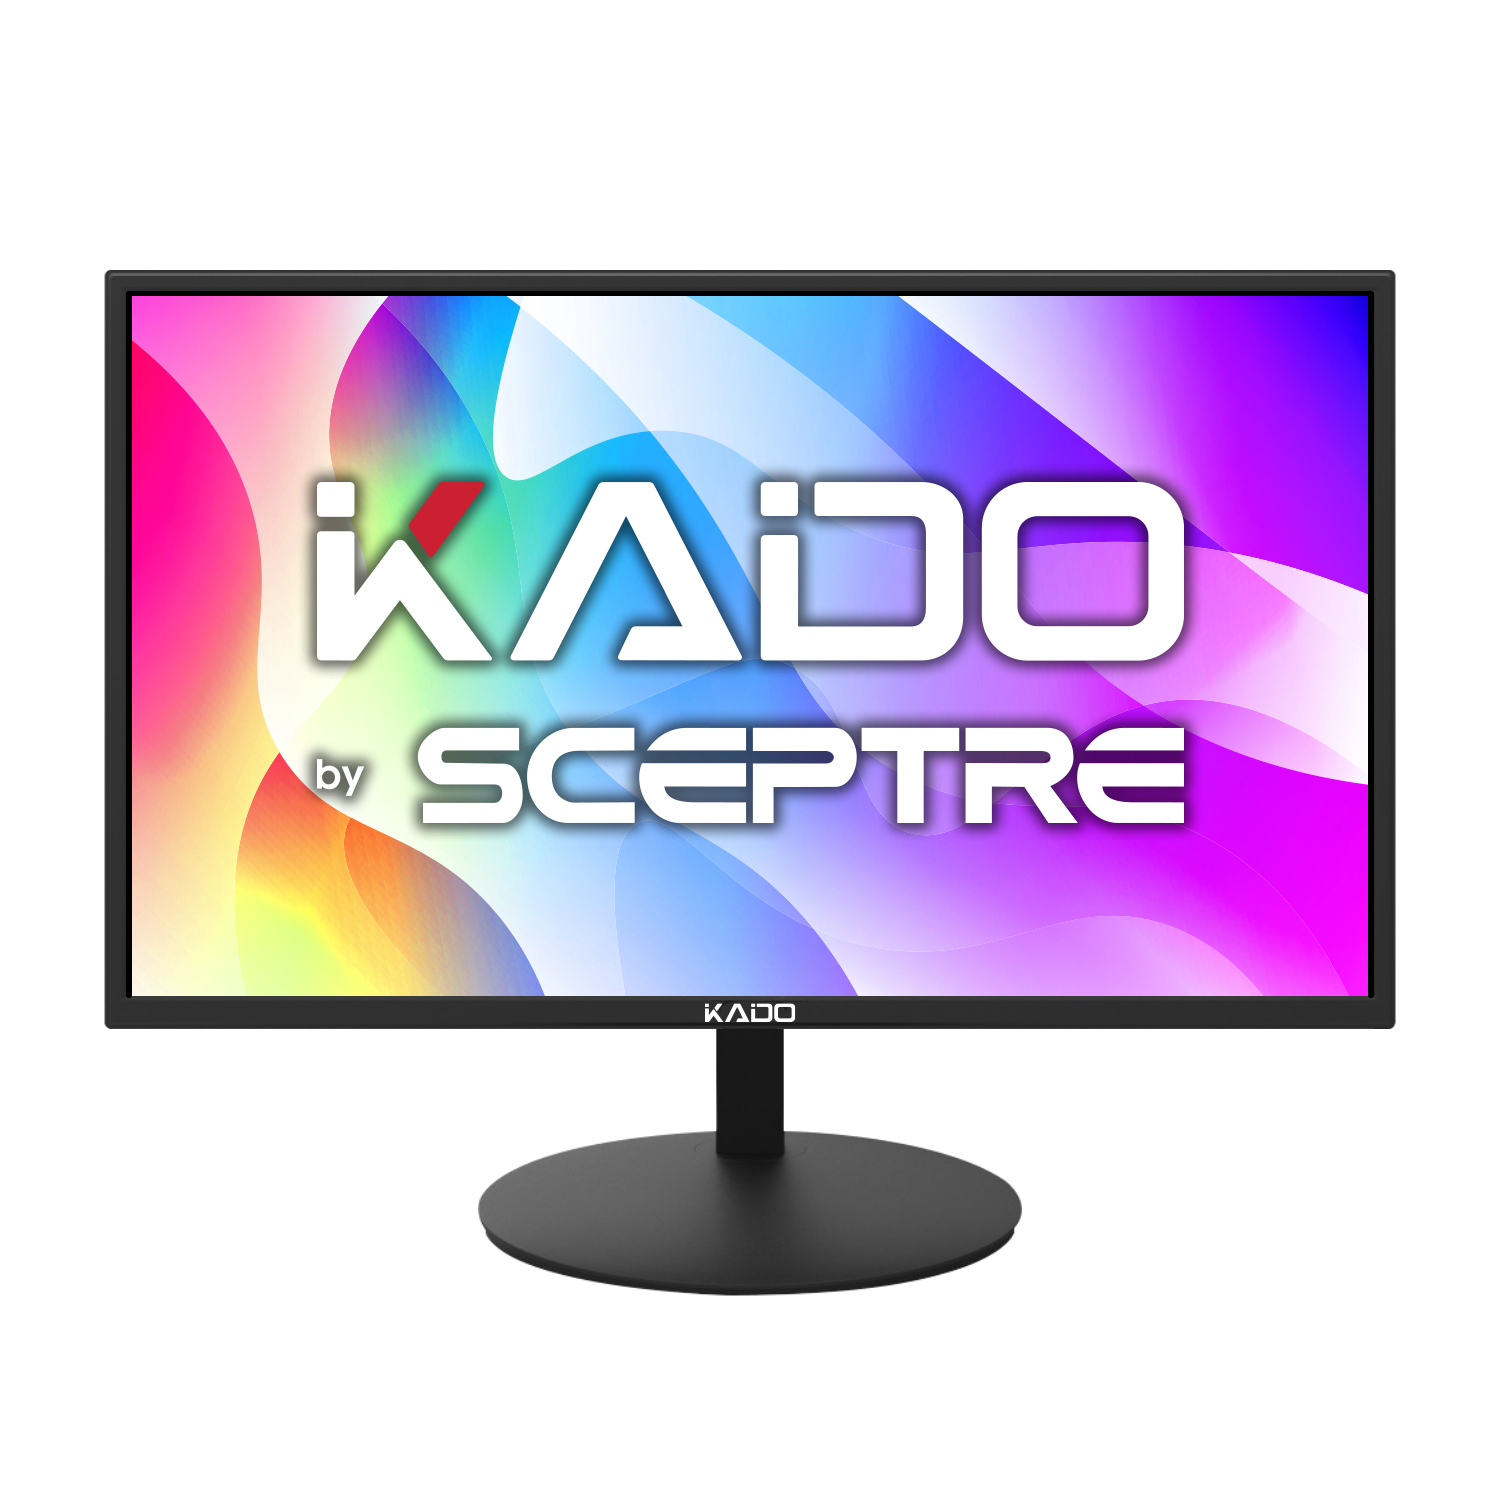 

Kado By Sceptre 27" Computer Monitor Gaming Office 1920x1080 Fhd 75hz Vga Built-in Speakers Wall Mount Ready Black